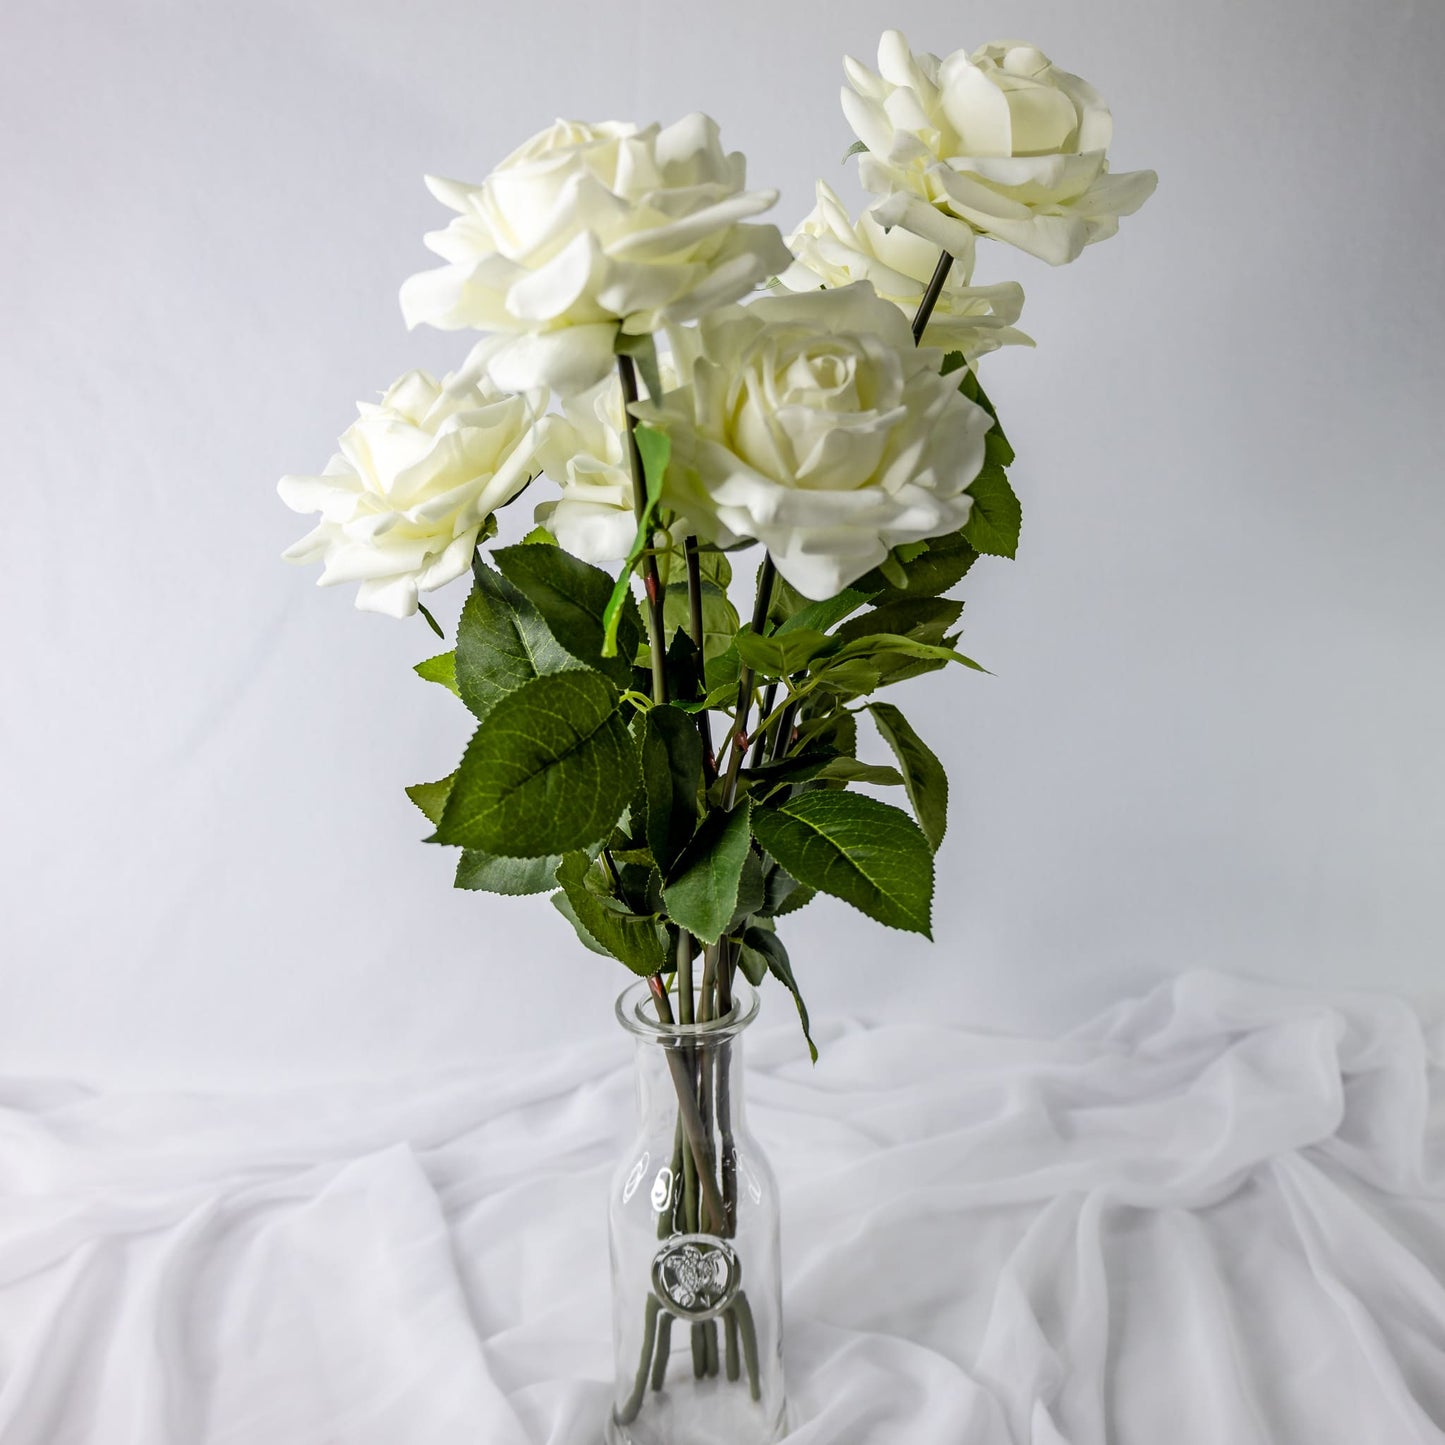 artificial white bloom roses placed in transparent glass vase